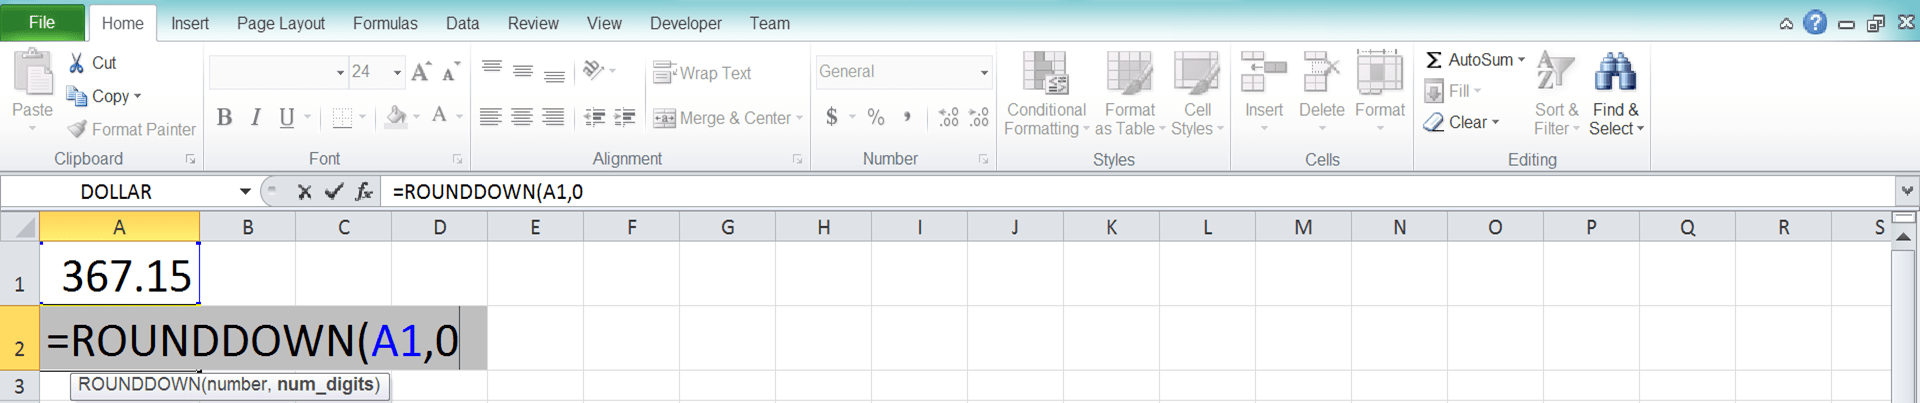 Excel ROUNDDOWN Formula: Functions, Examples, and How to Use - Screenshot of Step 4